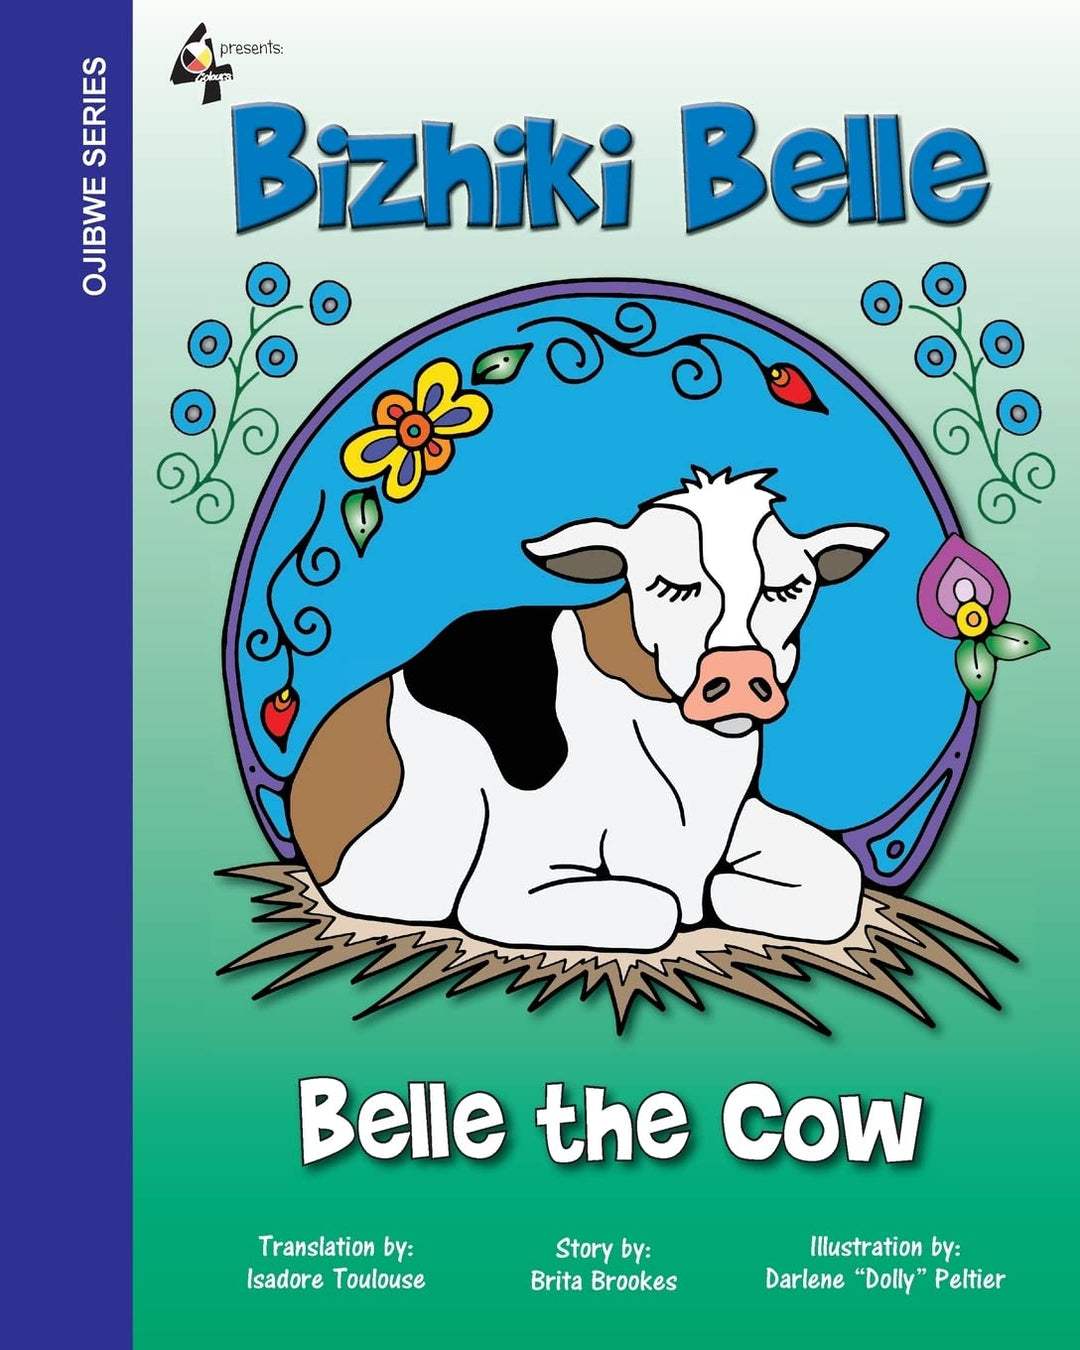 Belle The Cow: Bizhiki Belle  by Brita Brookes